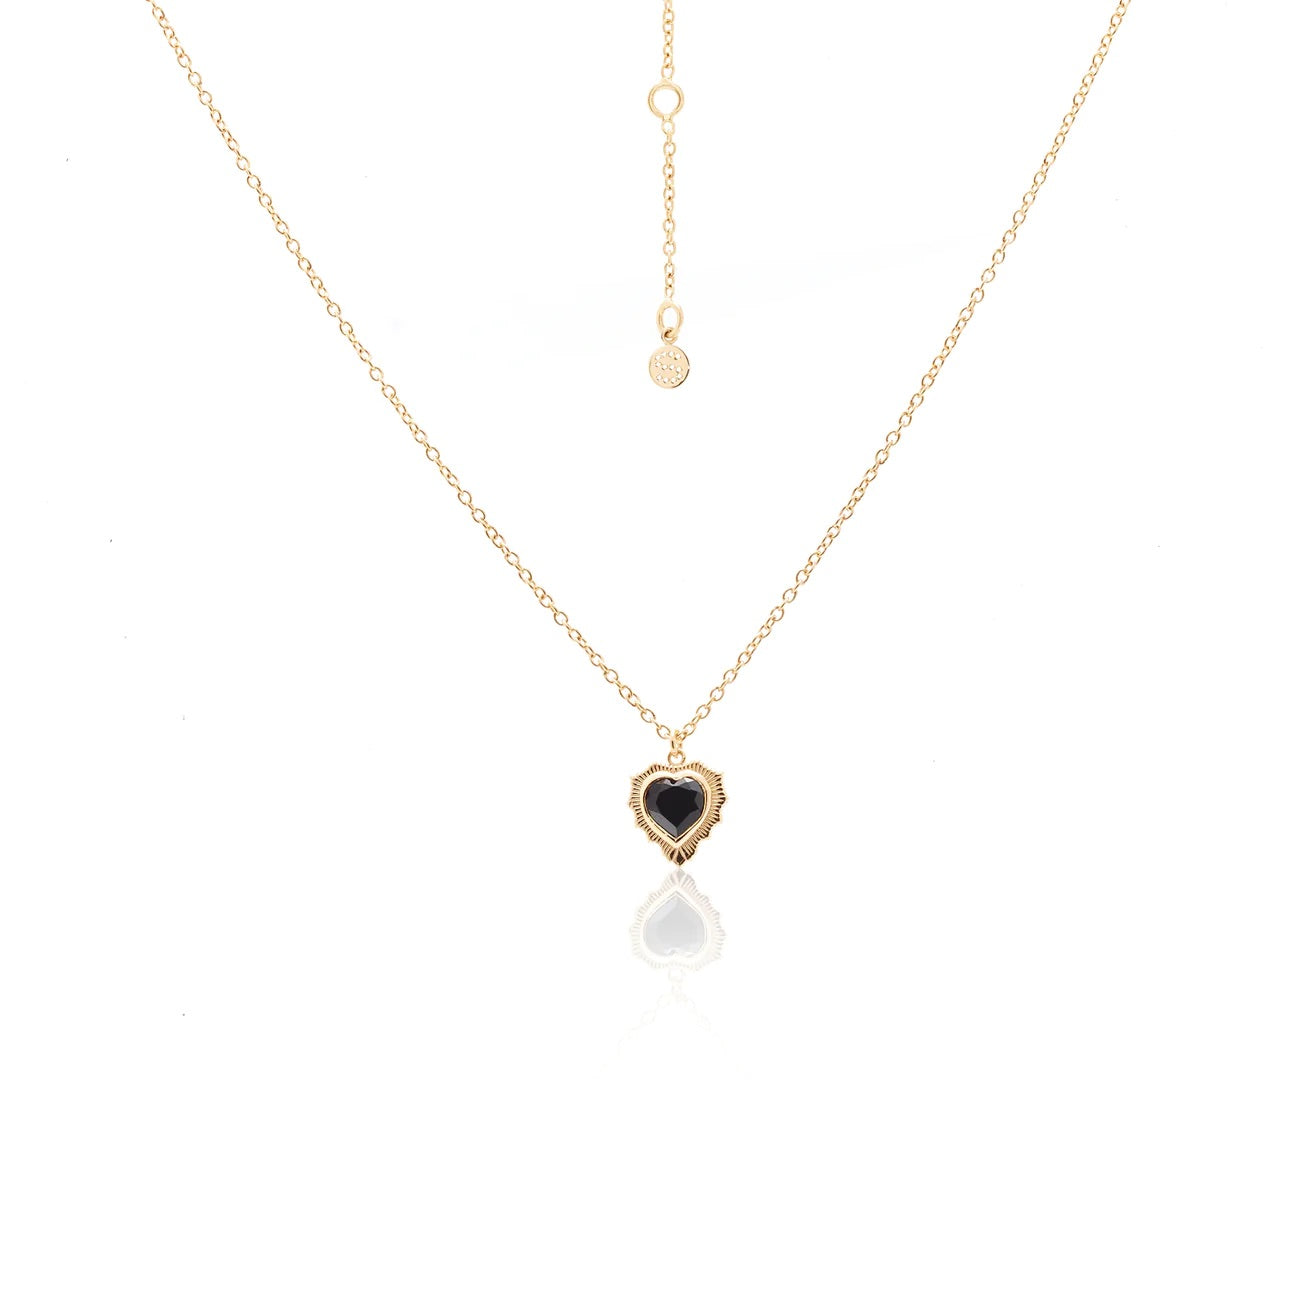 Amour Necklace By Silk & Steel - Black/Gold